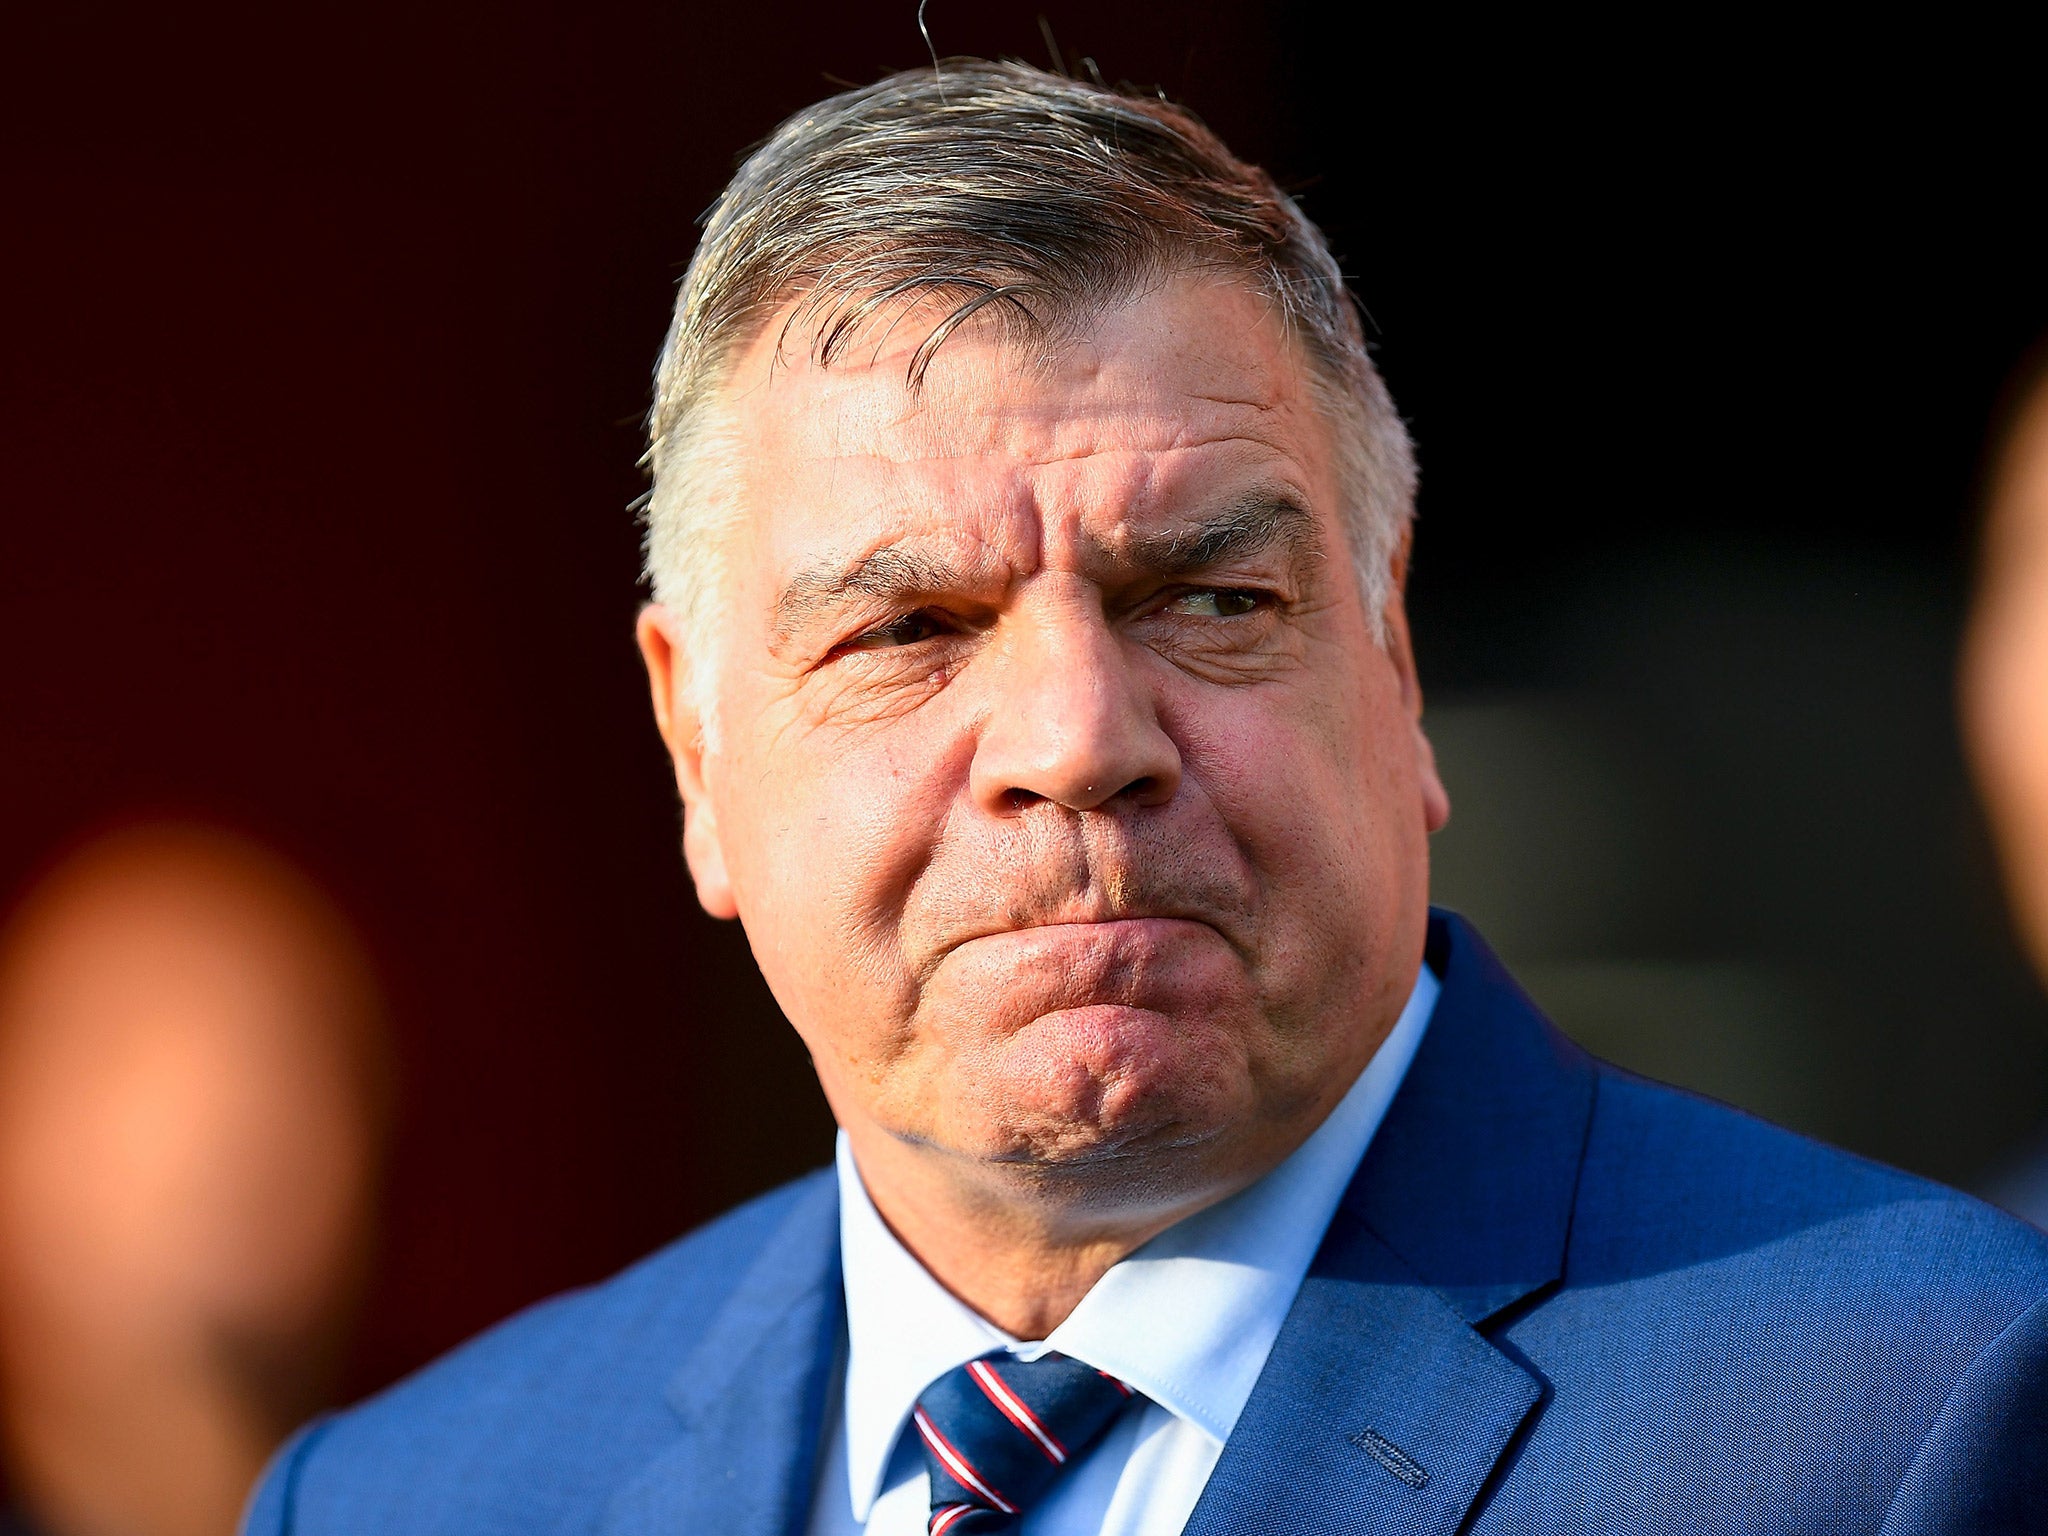 Sam Allardyce left his role as England manager by mutual consent